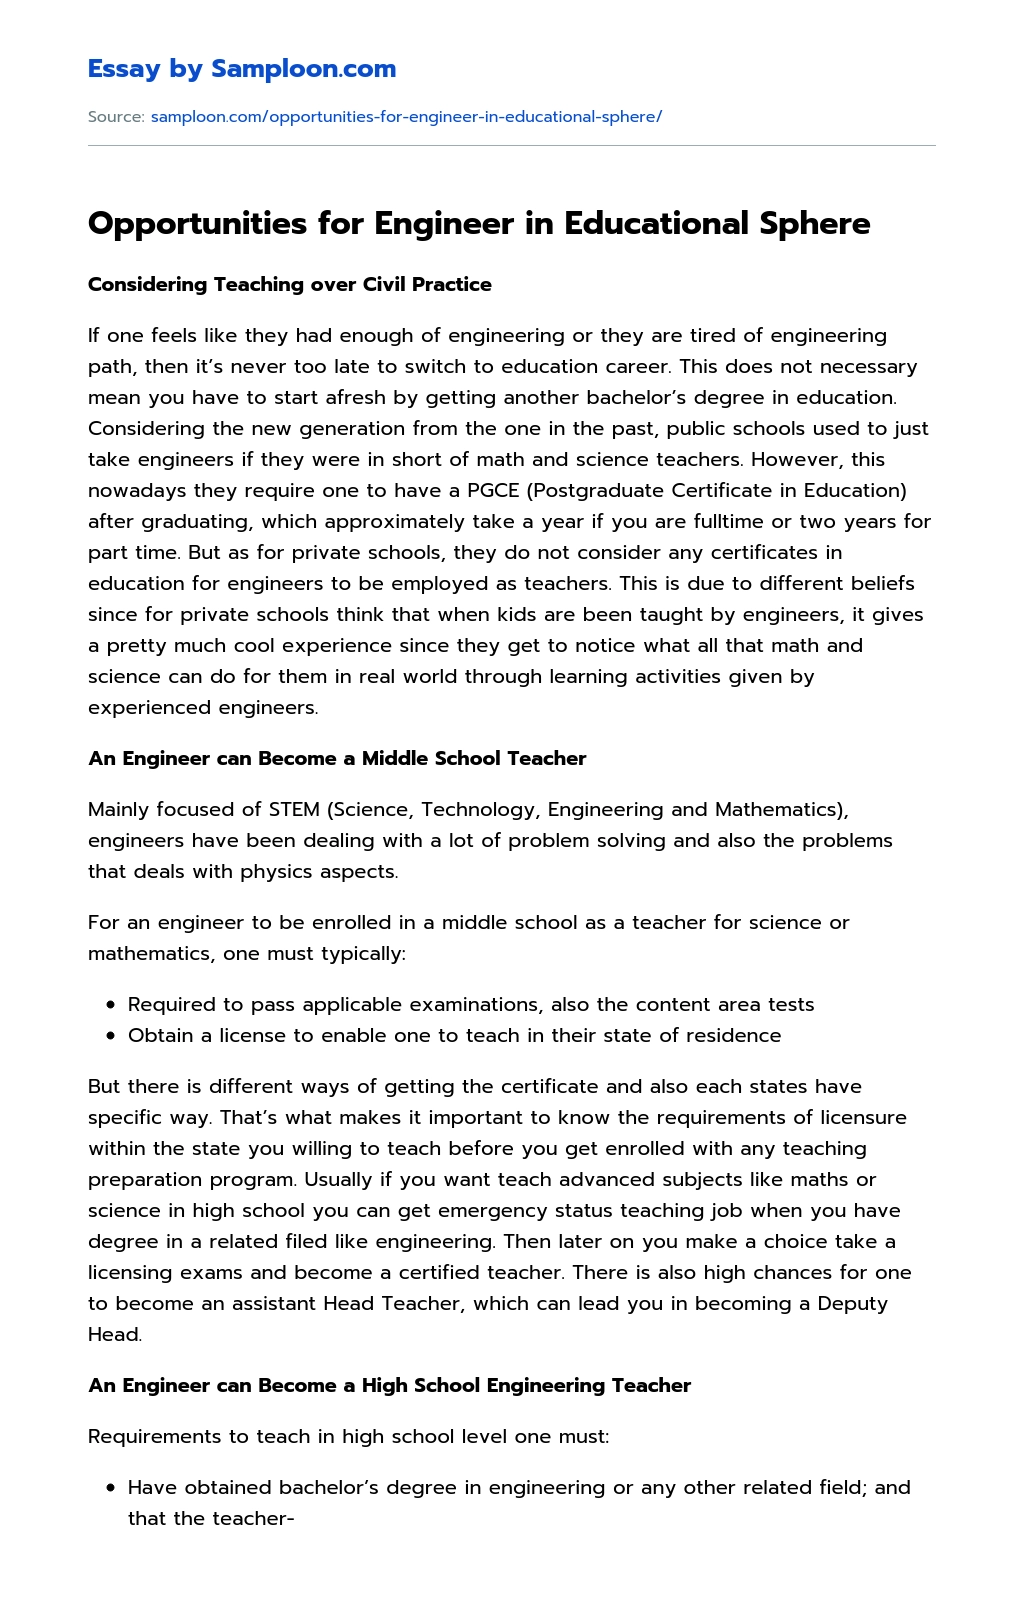 Opportunities for Engineer in Educational Sphere essay